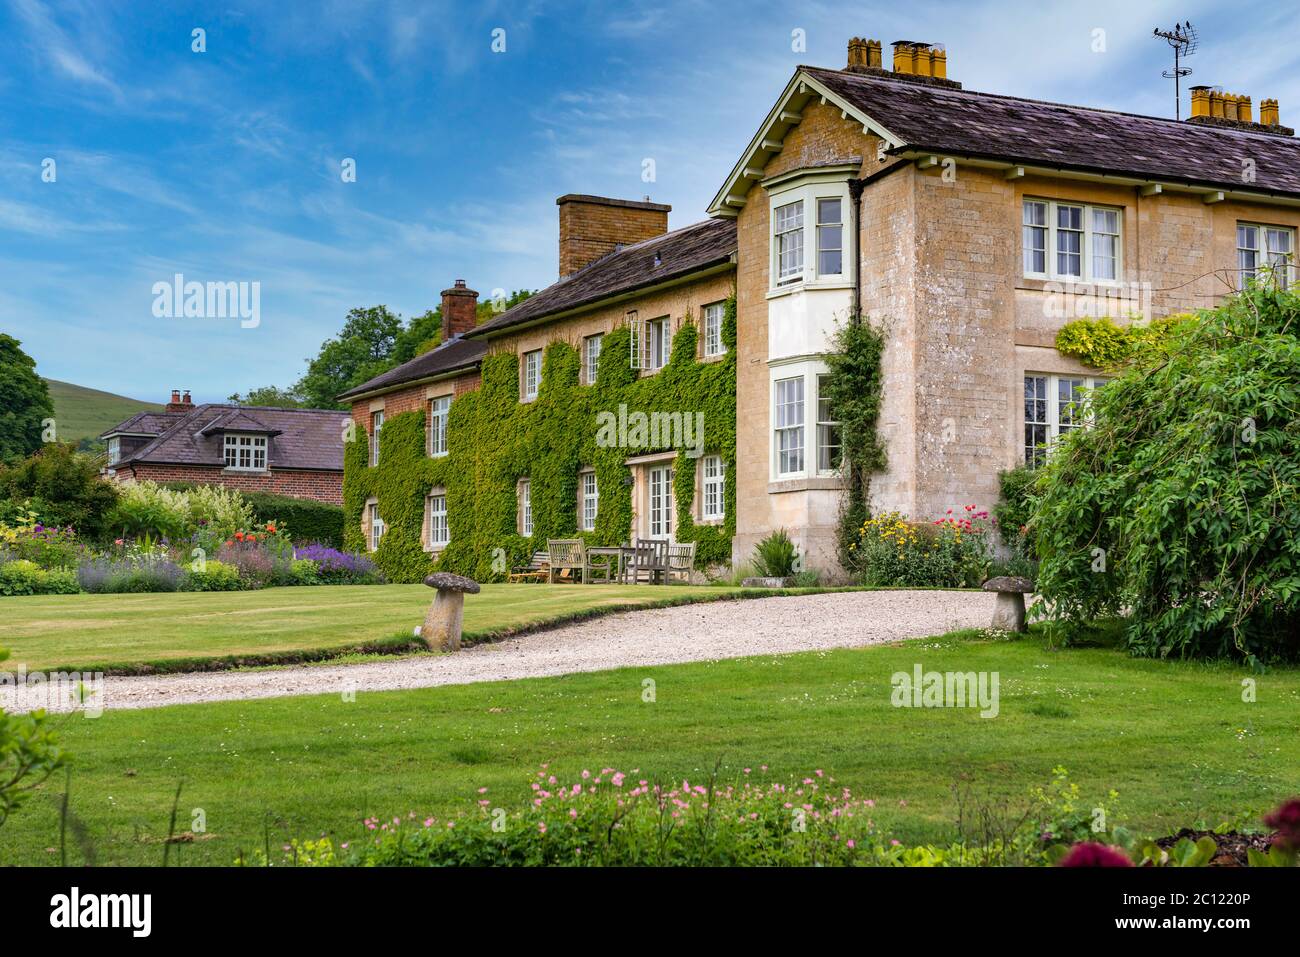 A large estate home and gardens near Salisbury, Wiltshire, England, Europe. Stock Photo